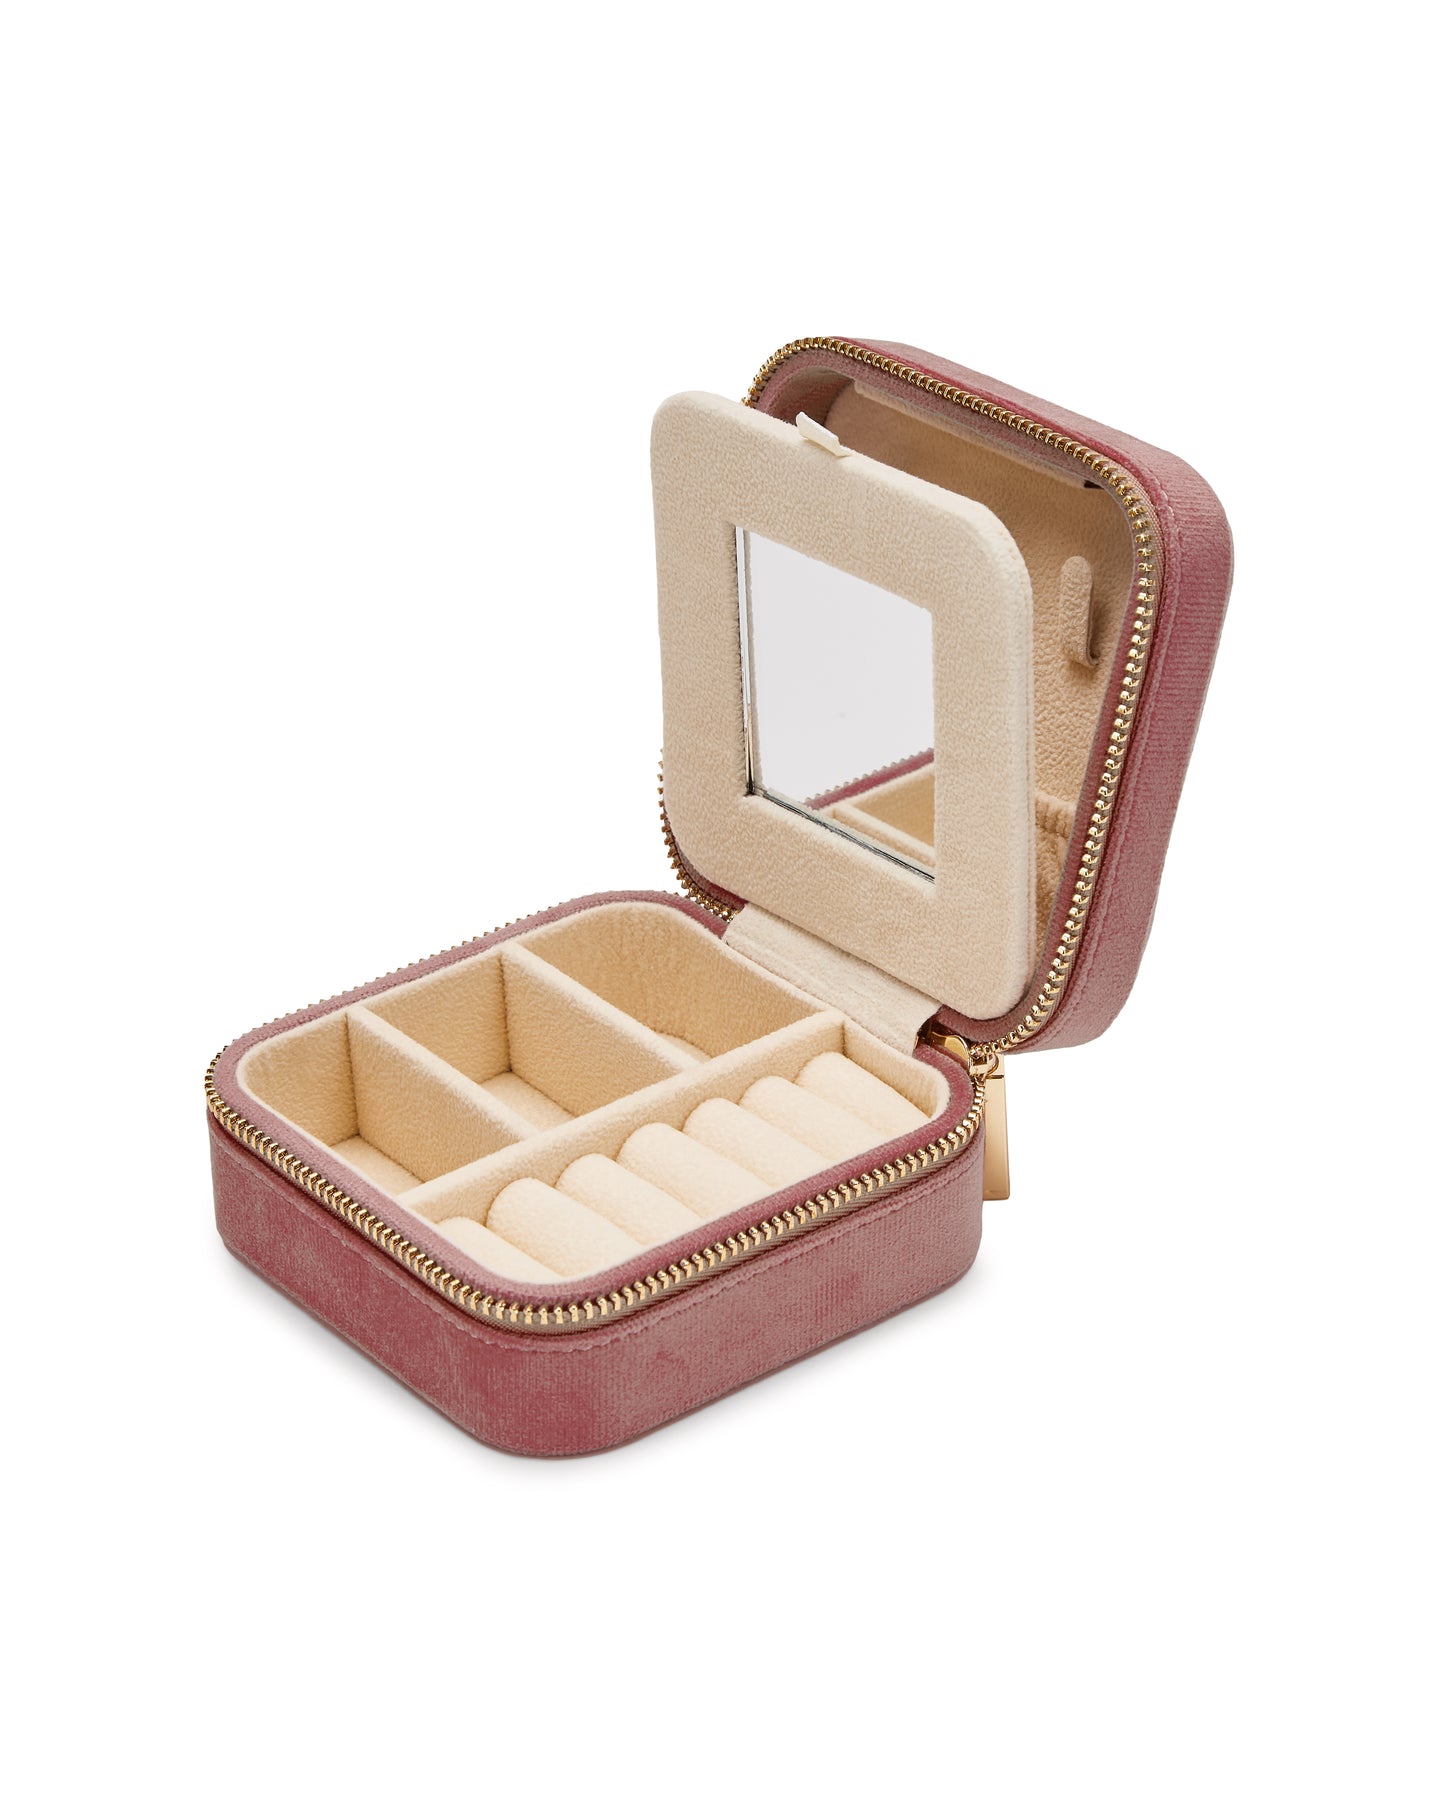 VELVET JEWELRY BOX col. terracotta, directly orderable - 5 pieces